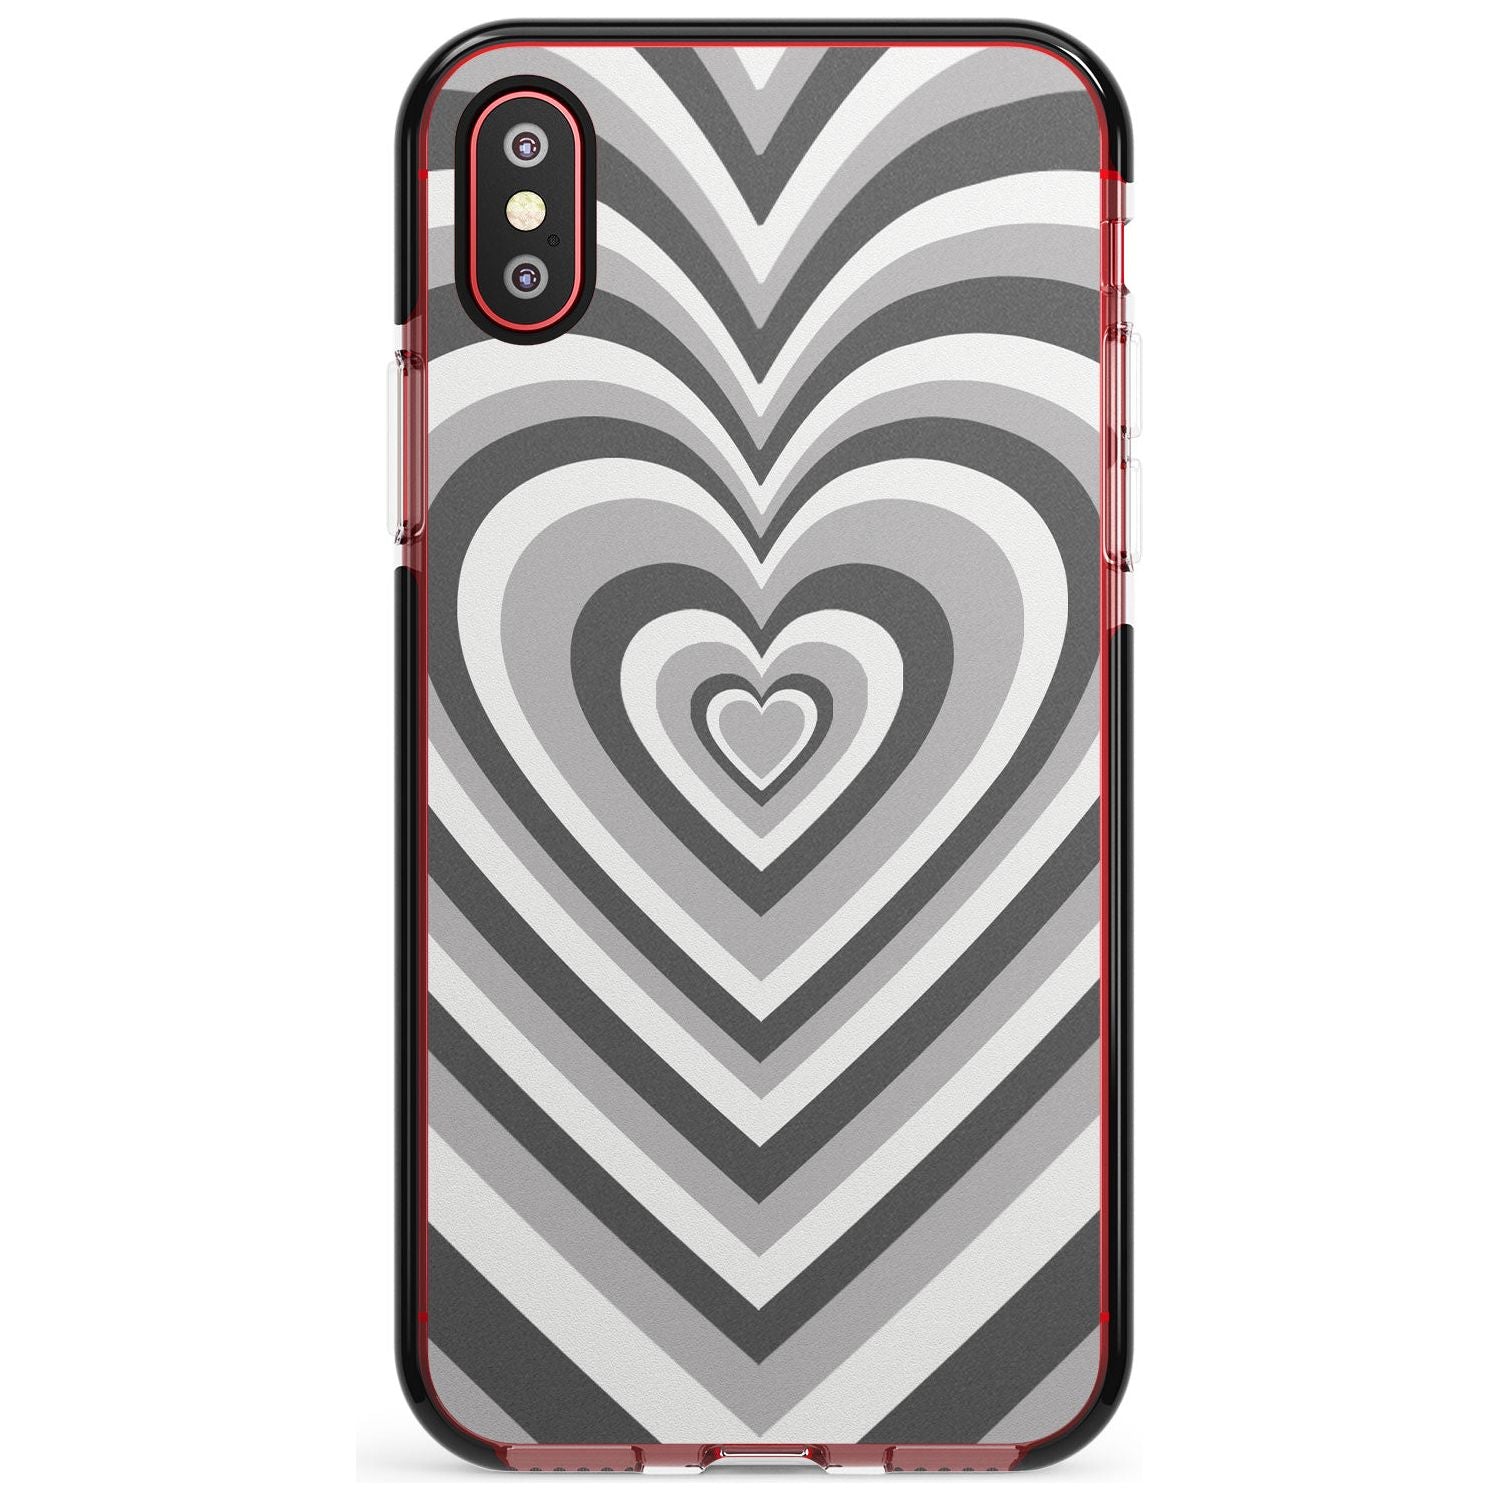 Monochrome Heart Illusion Black Impact Phone Case for iPhone X XS Max XR